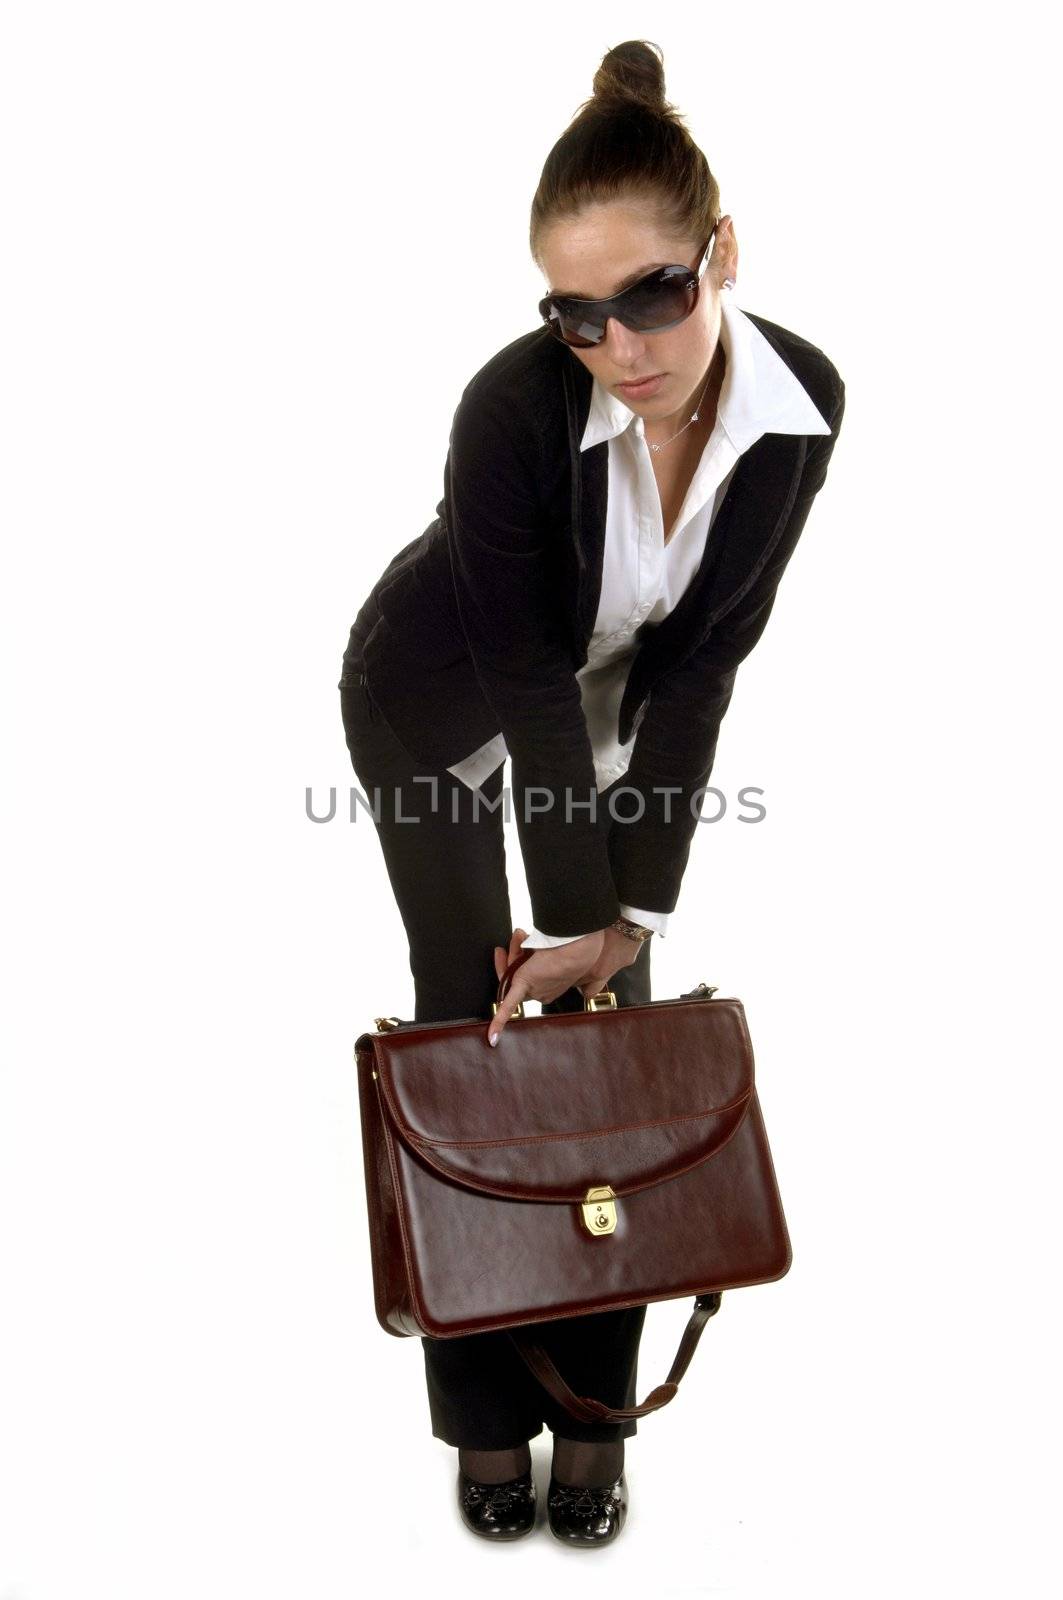 Briefcase and businesswoman